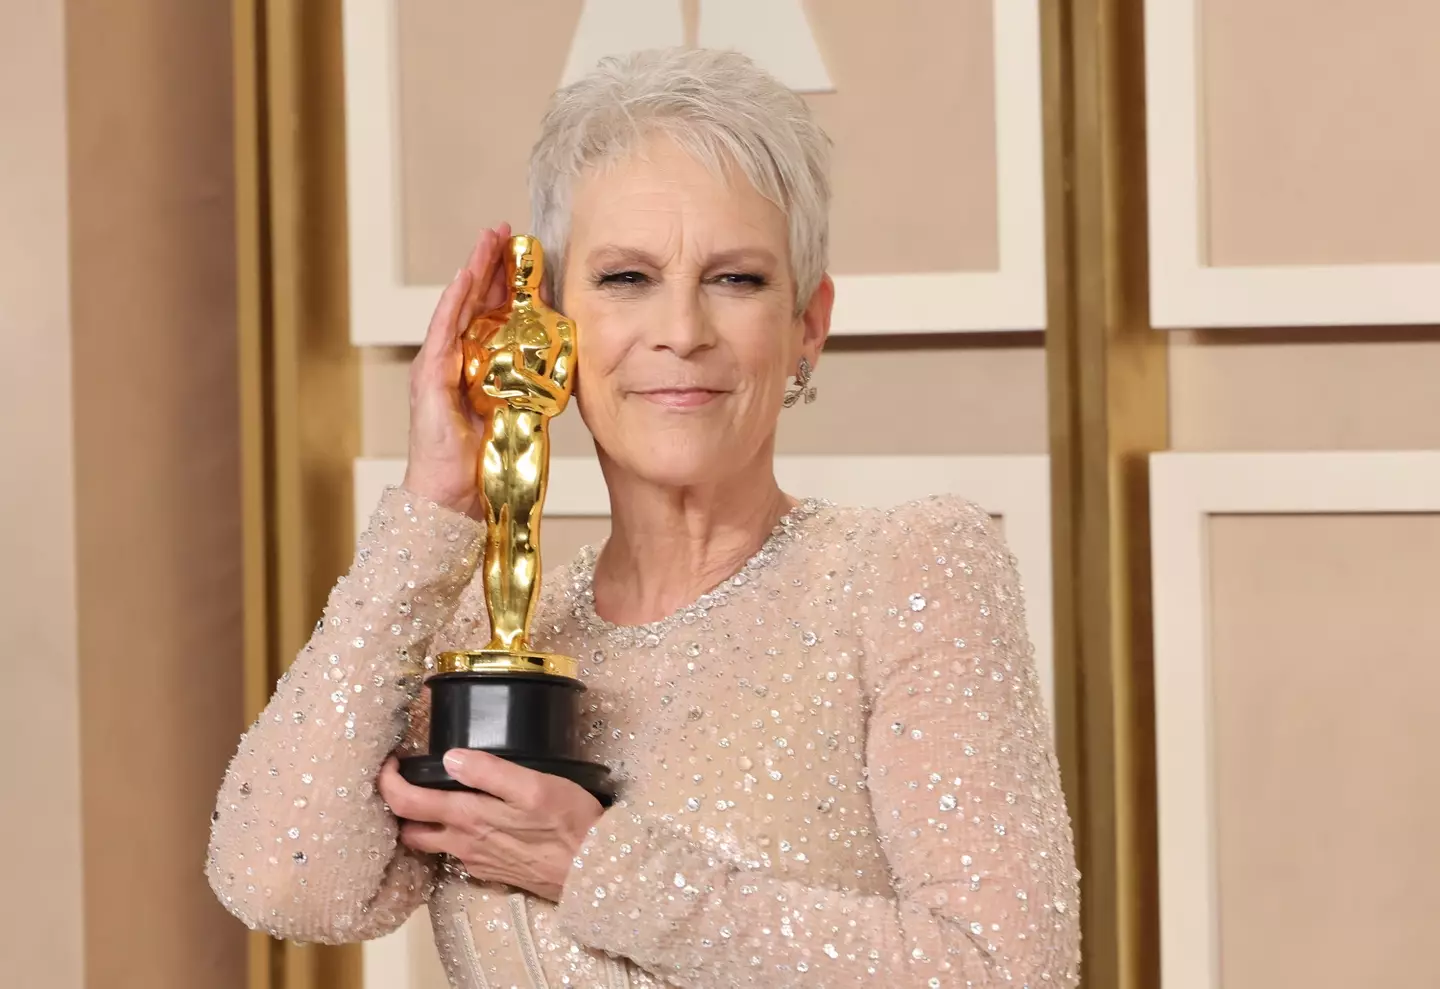 The Oscar-winning actor has previously opened up about learning about the ‘new terminology and words’ associated with having a trans daughter.